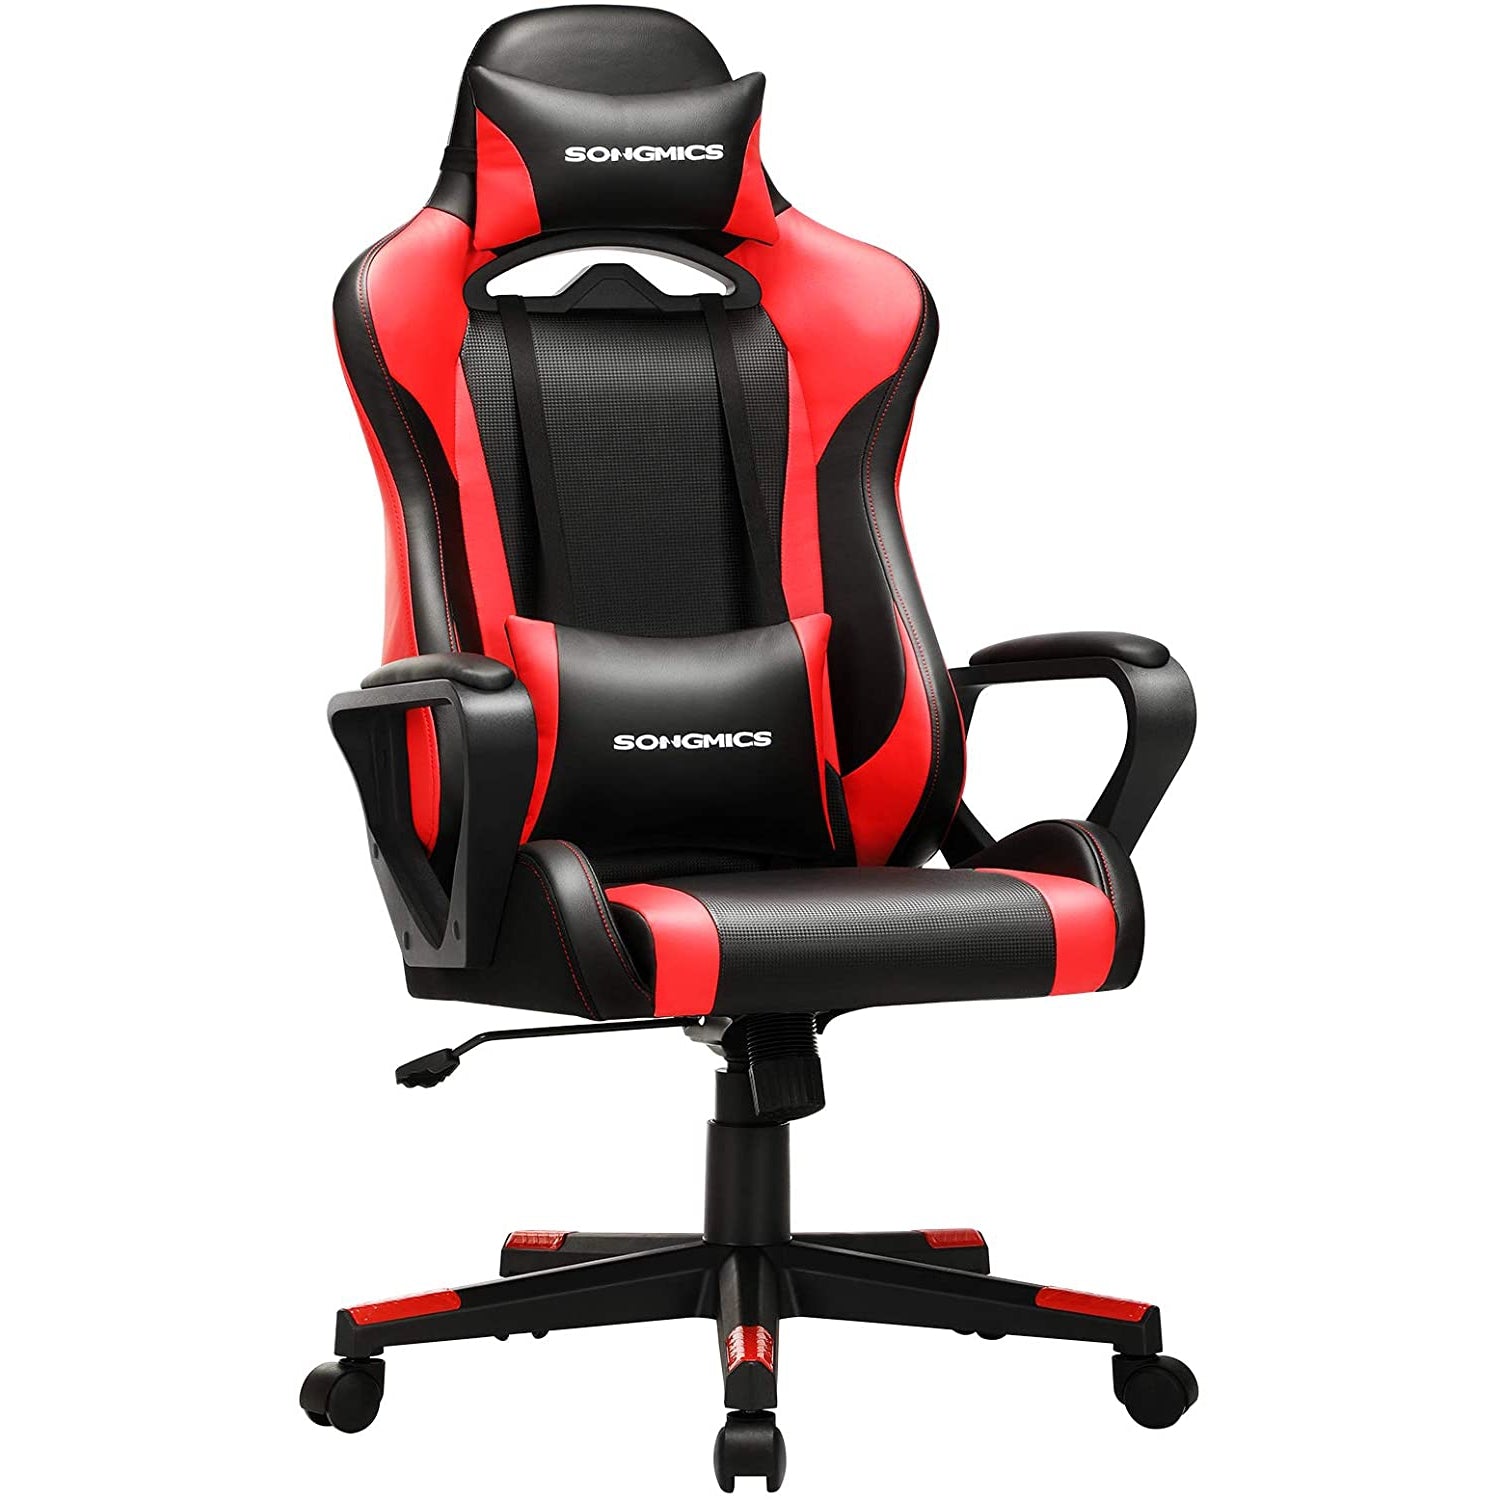 Nancy's Butcher Gaming chair - Office chair - Swivel chair - Lumbar cushion - Ergonomic - Height adjustable - Red - Black - Faux leather - 71 x 63 x (120-130)